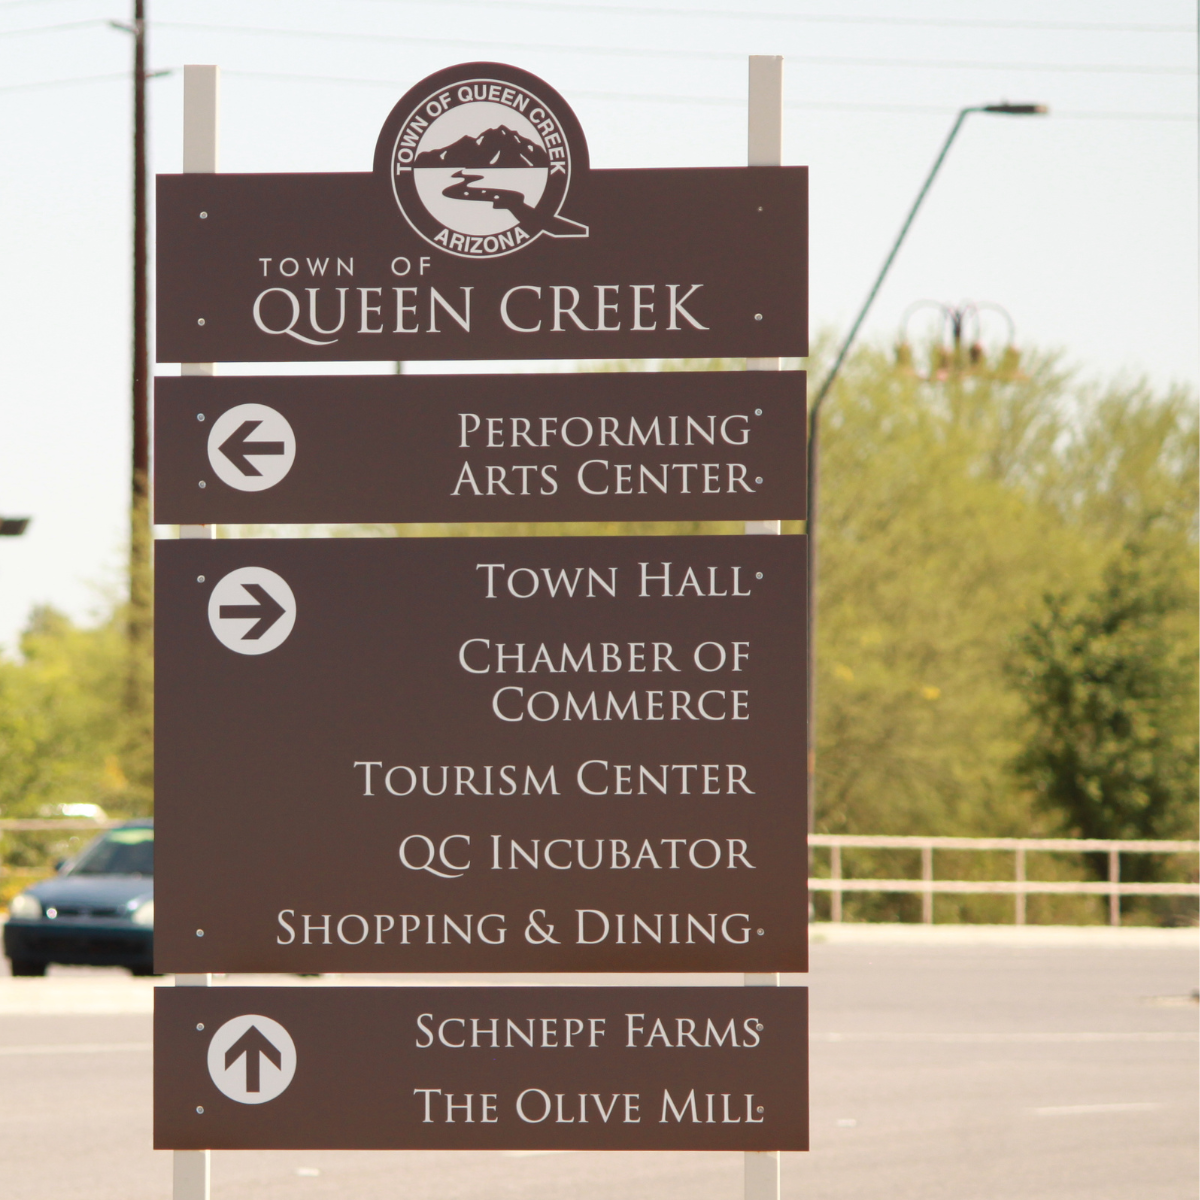 wayfinding and placemaking sign in queen creek arizona